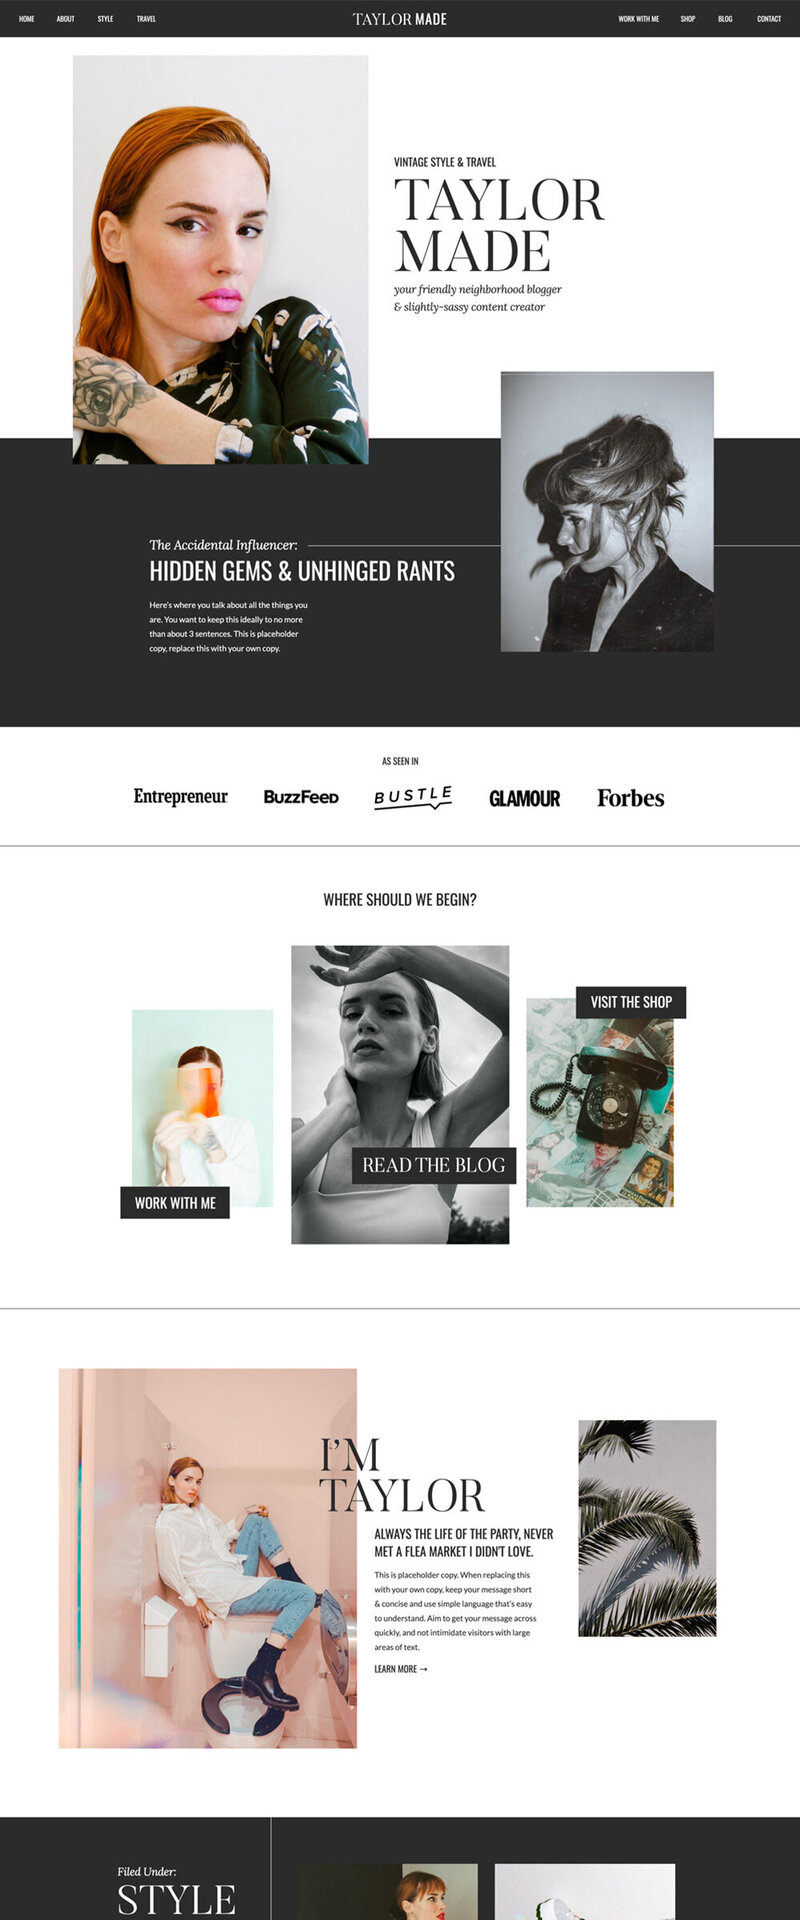 Showit-Website-Template-for-Content-Creators-and-Bloggers_Taylor-Made_Home-Cropped